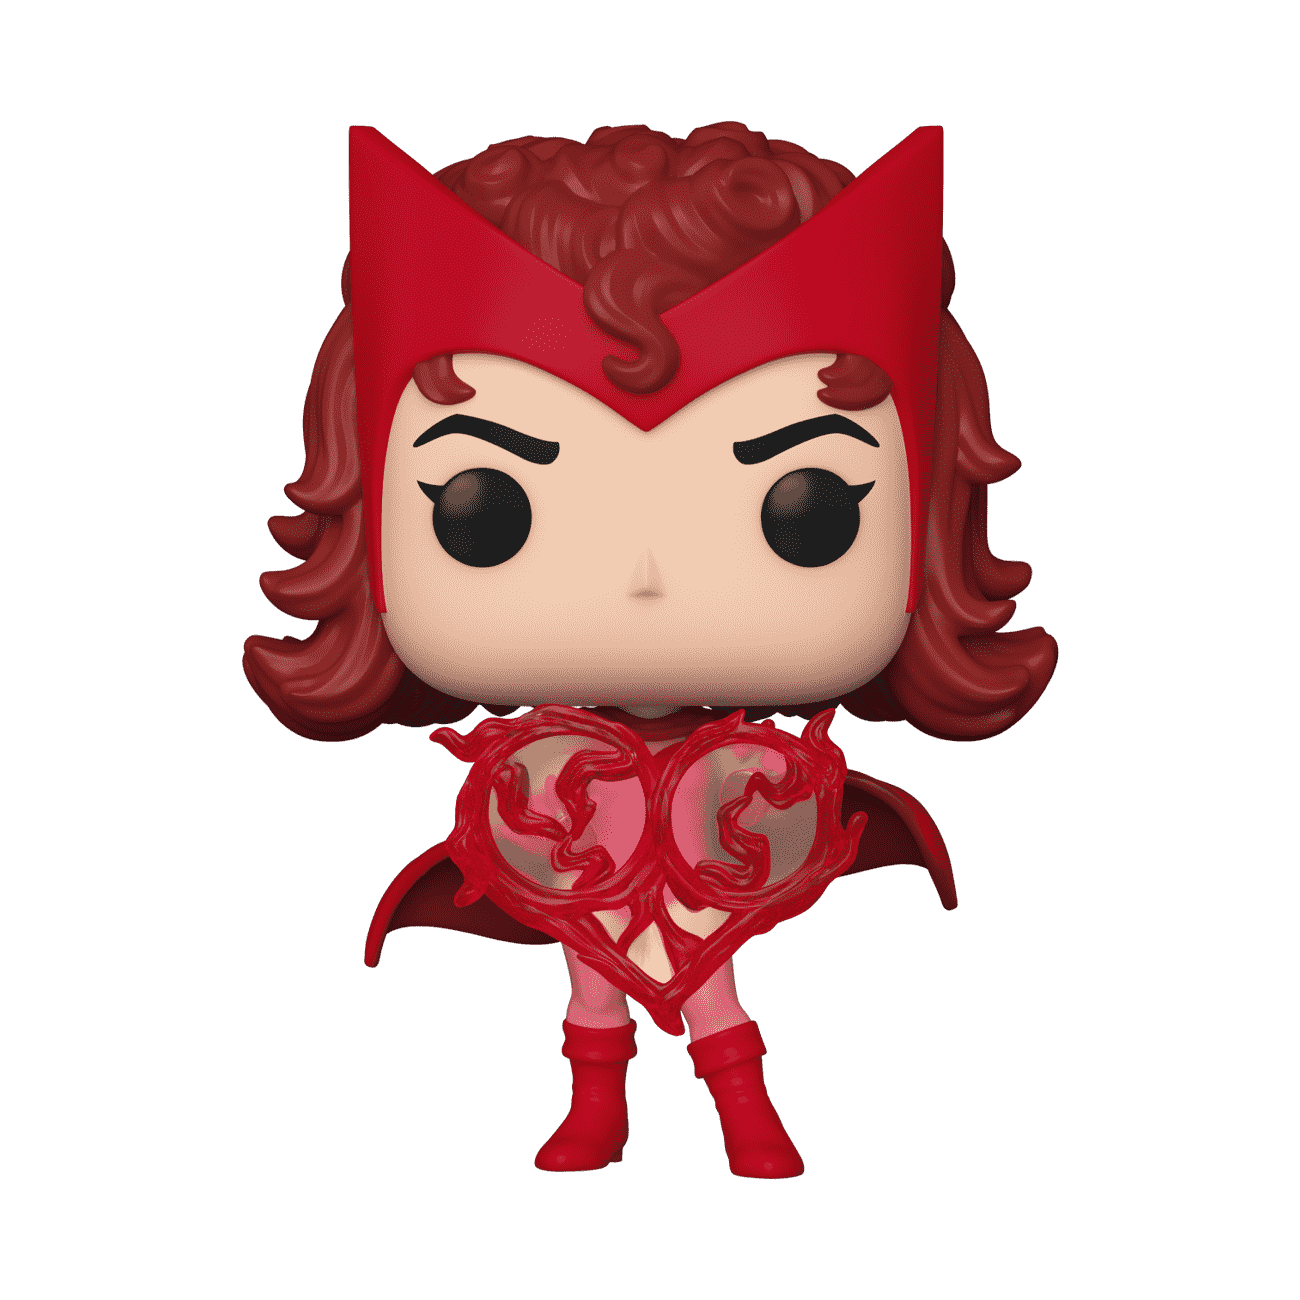 Buy Pop! Scarlet Witch with Heart Hex at Funko.